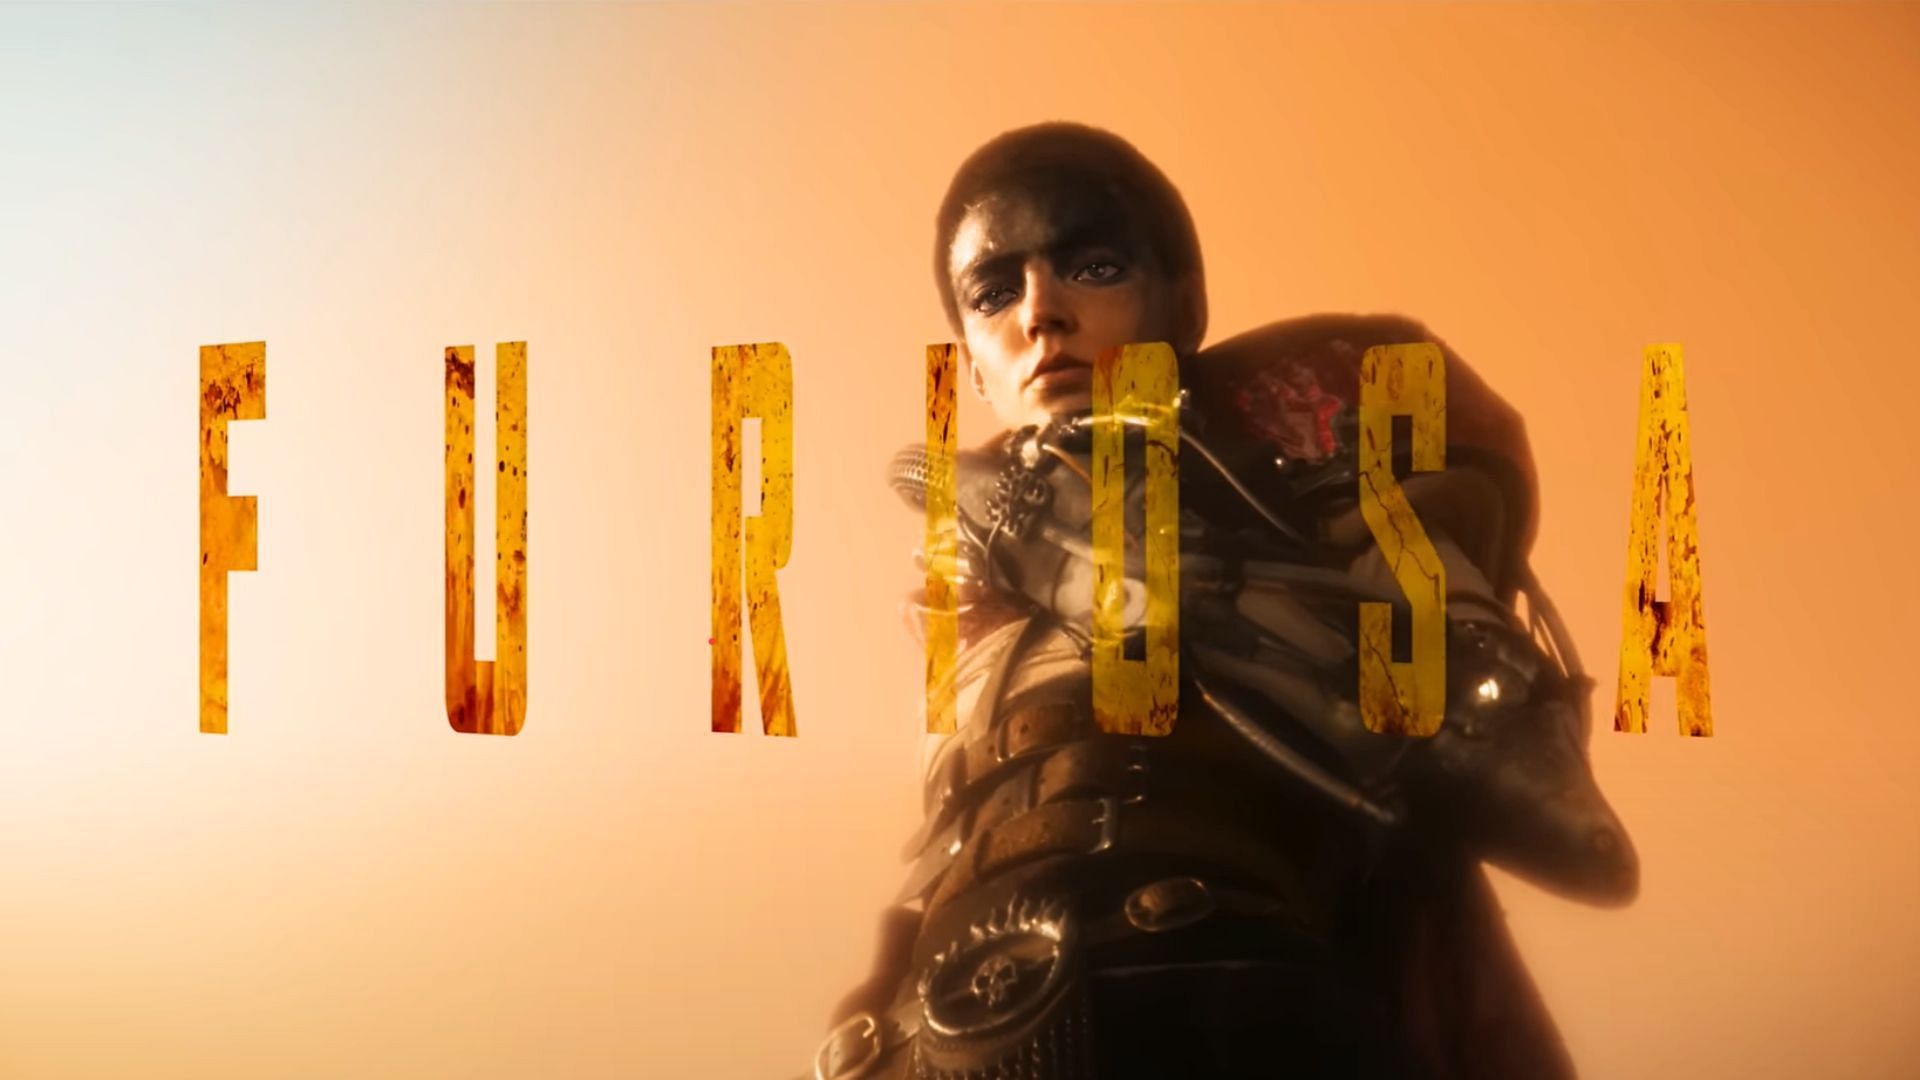 Mad max: Furiosa has dropped a trailer (Image via WB Pictures)